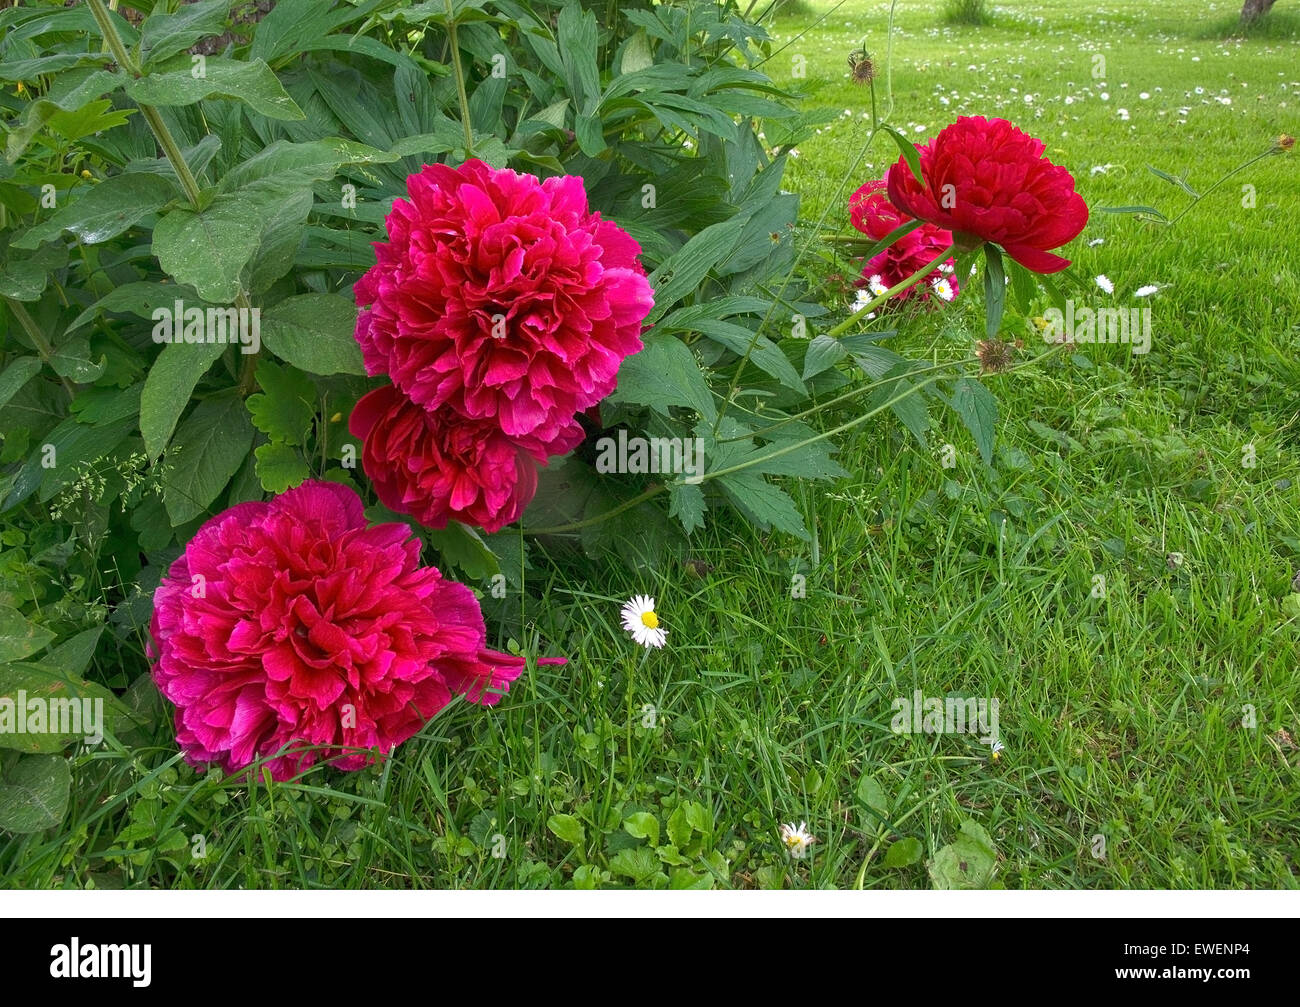 Red peonies growing in garden with green grass and white daisies, Sweden in June. Stock Photo